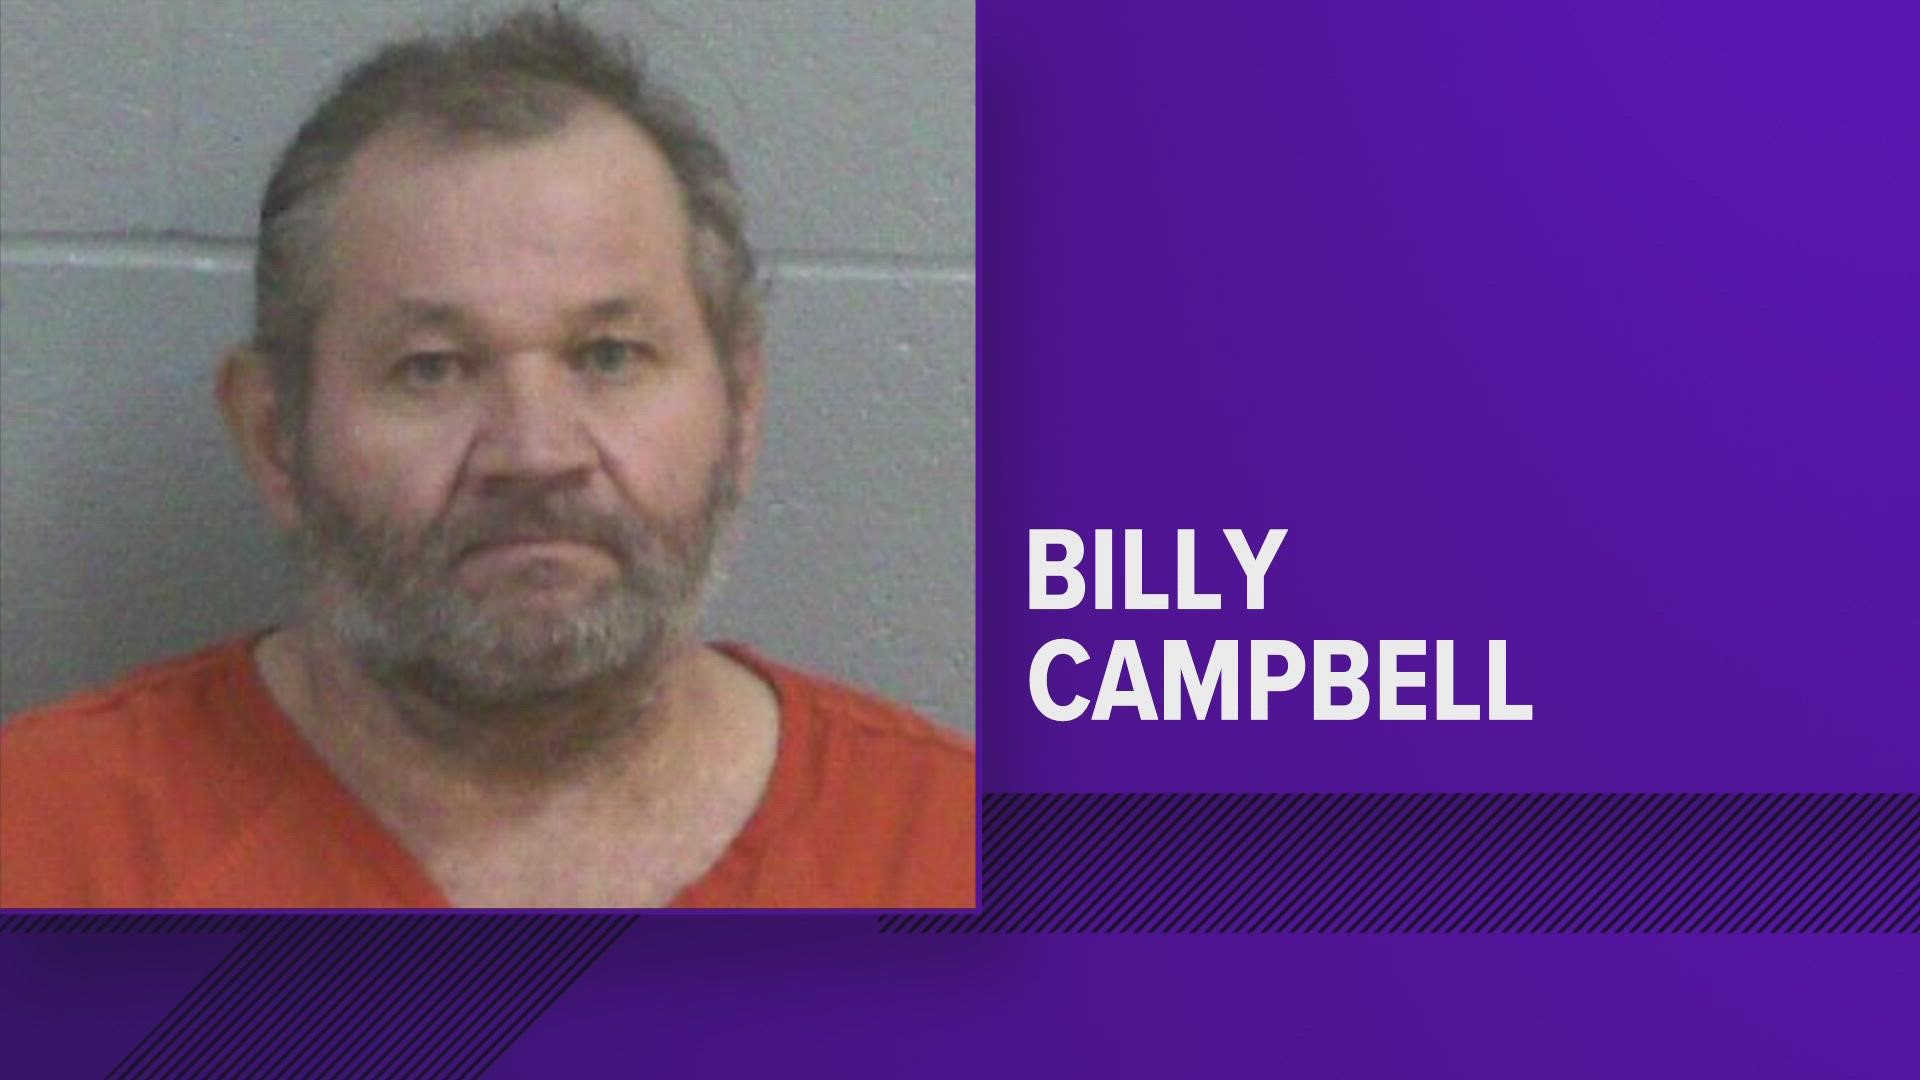 Billy Joe Campbell, 59, was initially arrested back in October 2021 for injury to elderly person, according to an Ector County Sheriff's Office spokesperson.